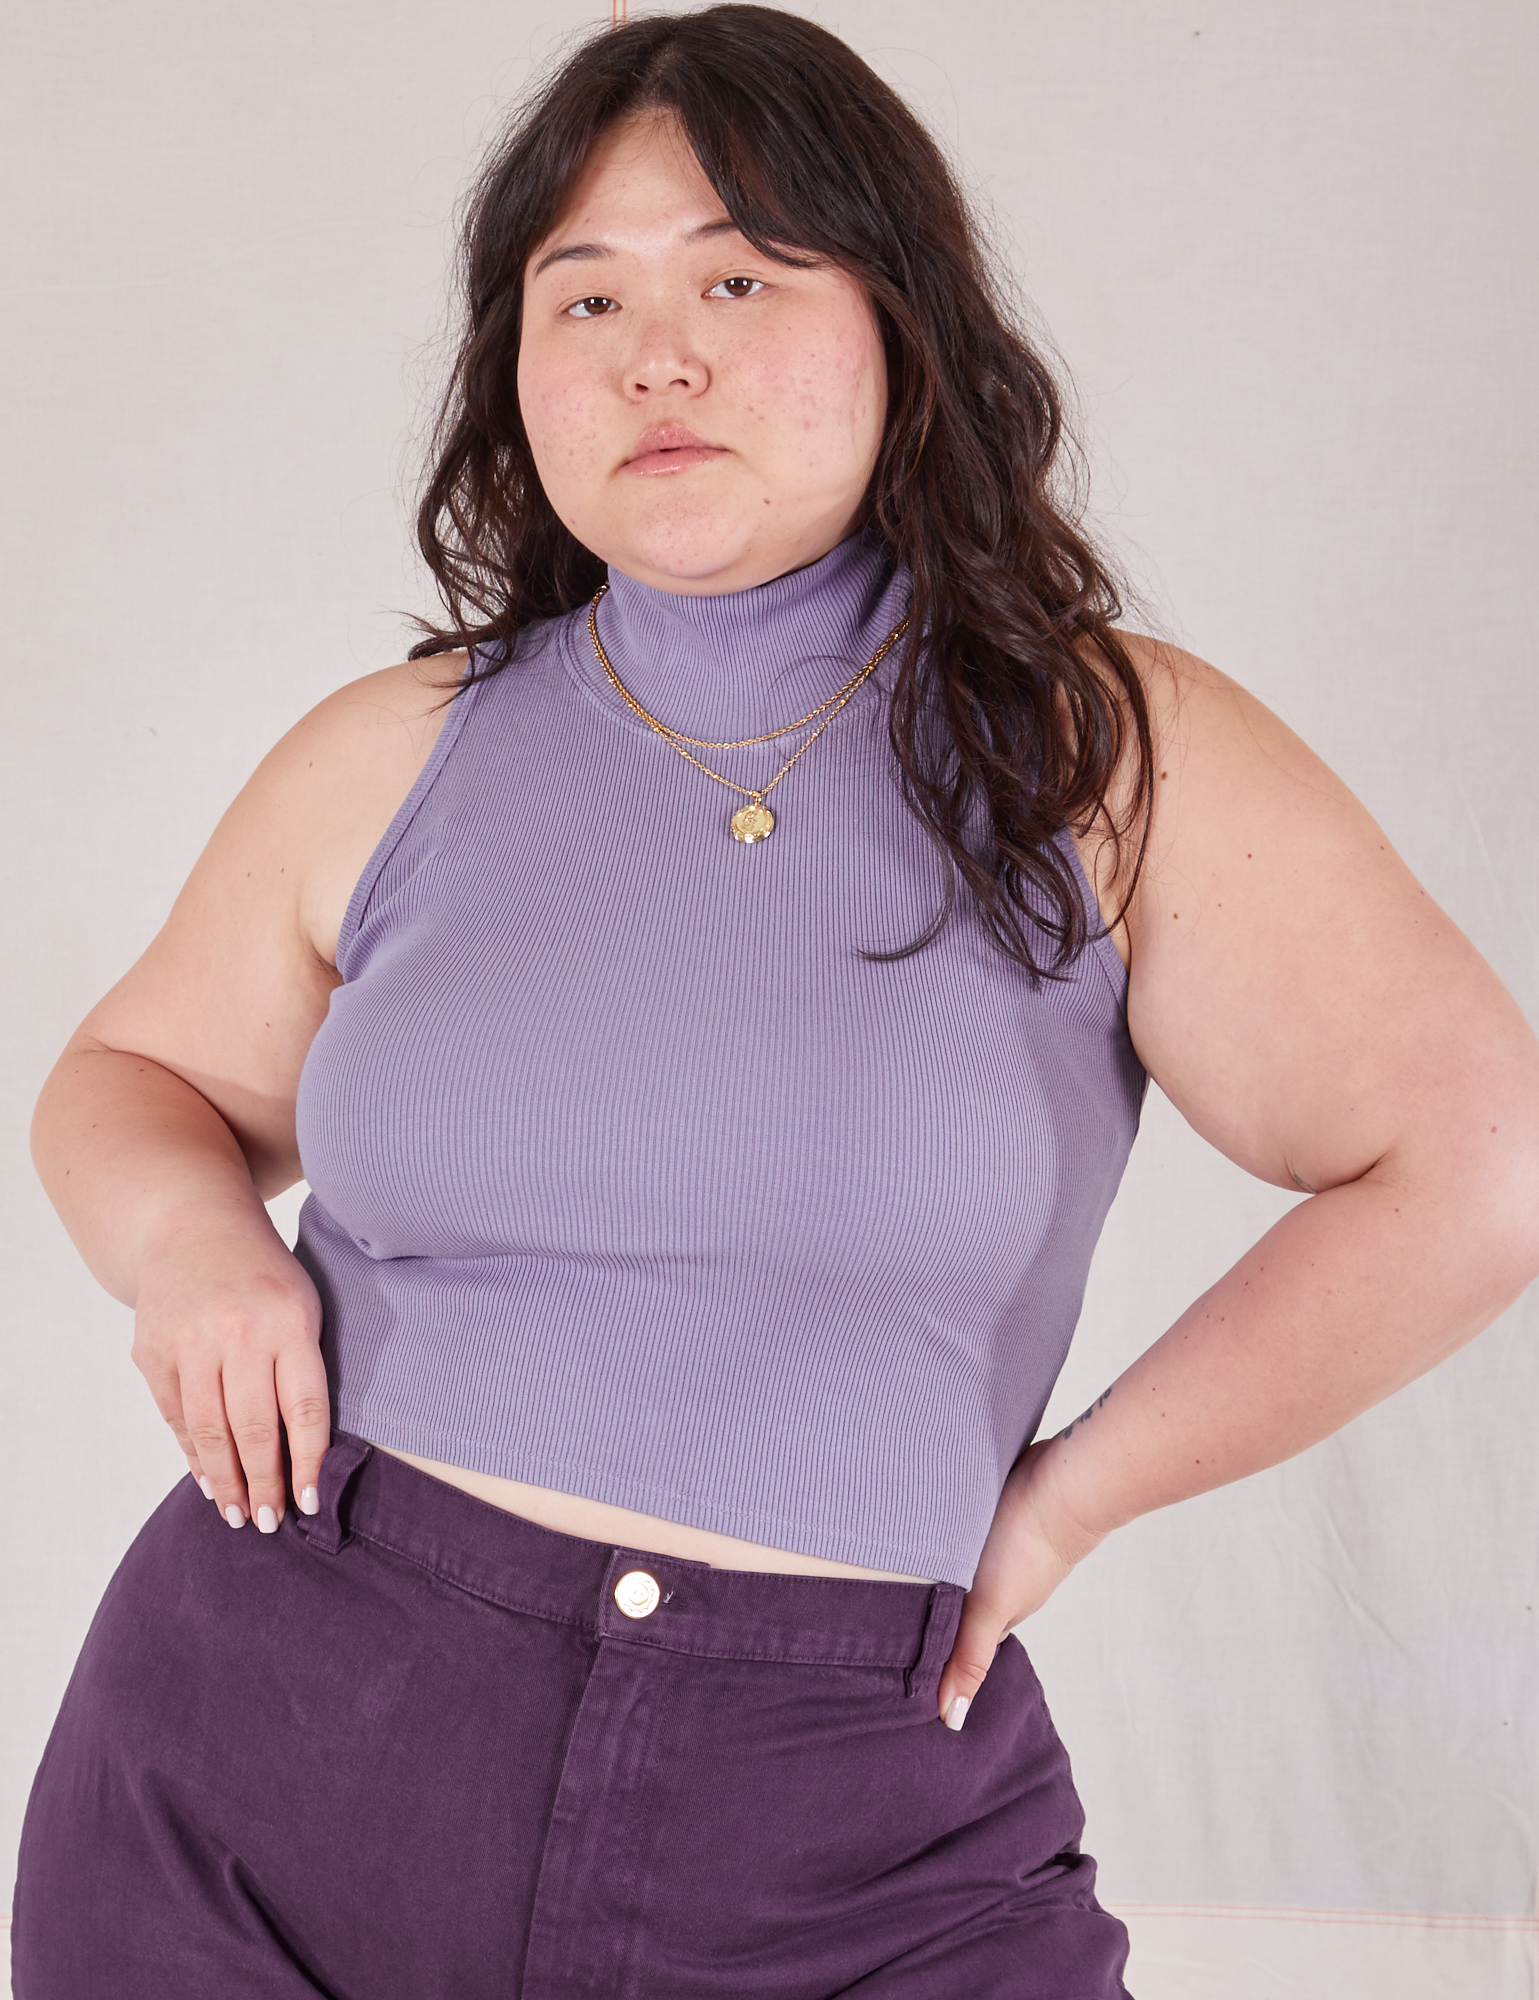 Ashley is 5'7" and wearing L Sleeveless Essential Turtleneck in Faded Grape